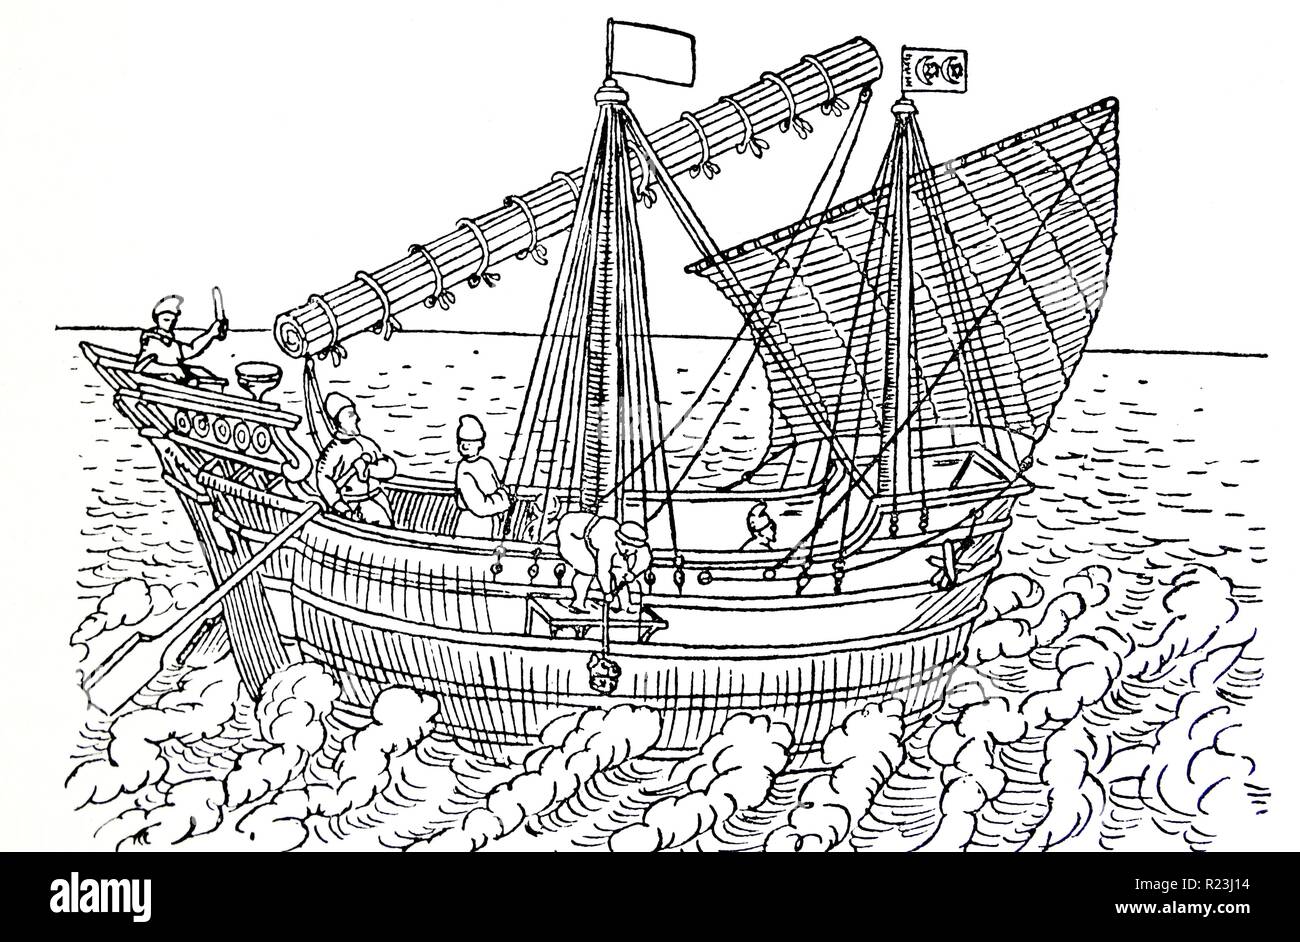 A ship of Java and the China Seas in the 16th century. From Linschoten's navigation ac Itinerarium, 1598. Stock Photo